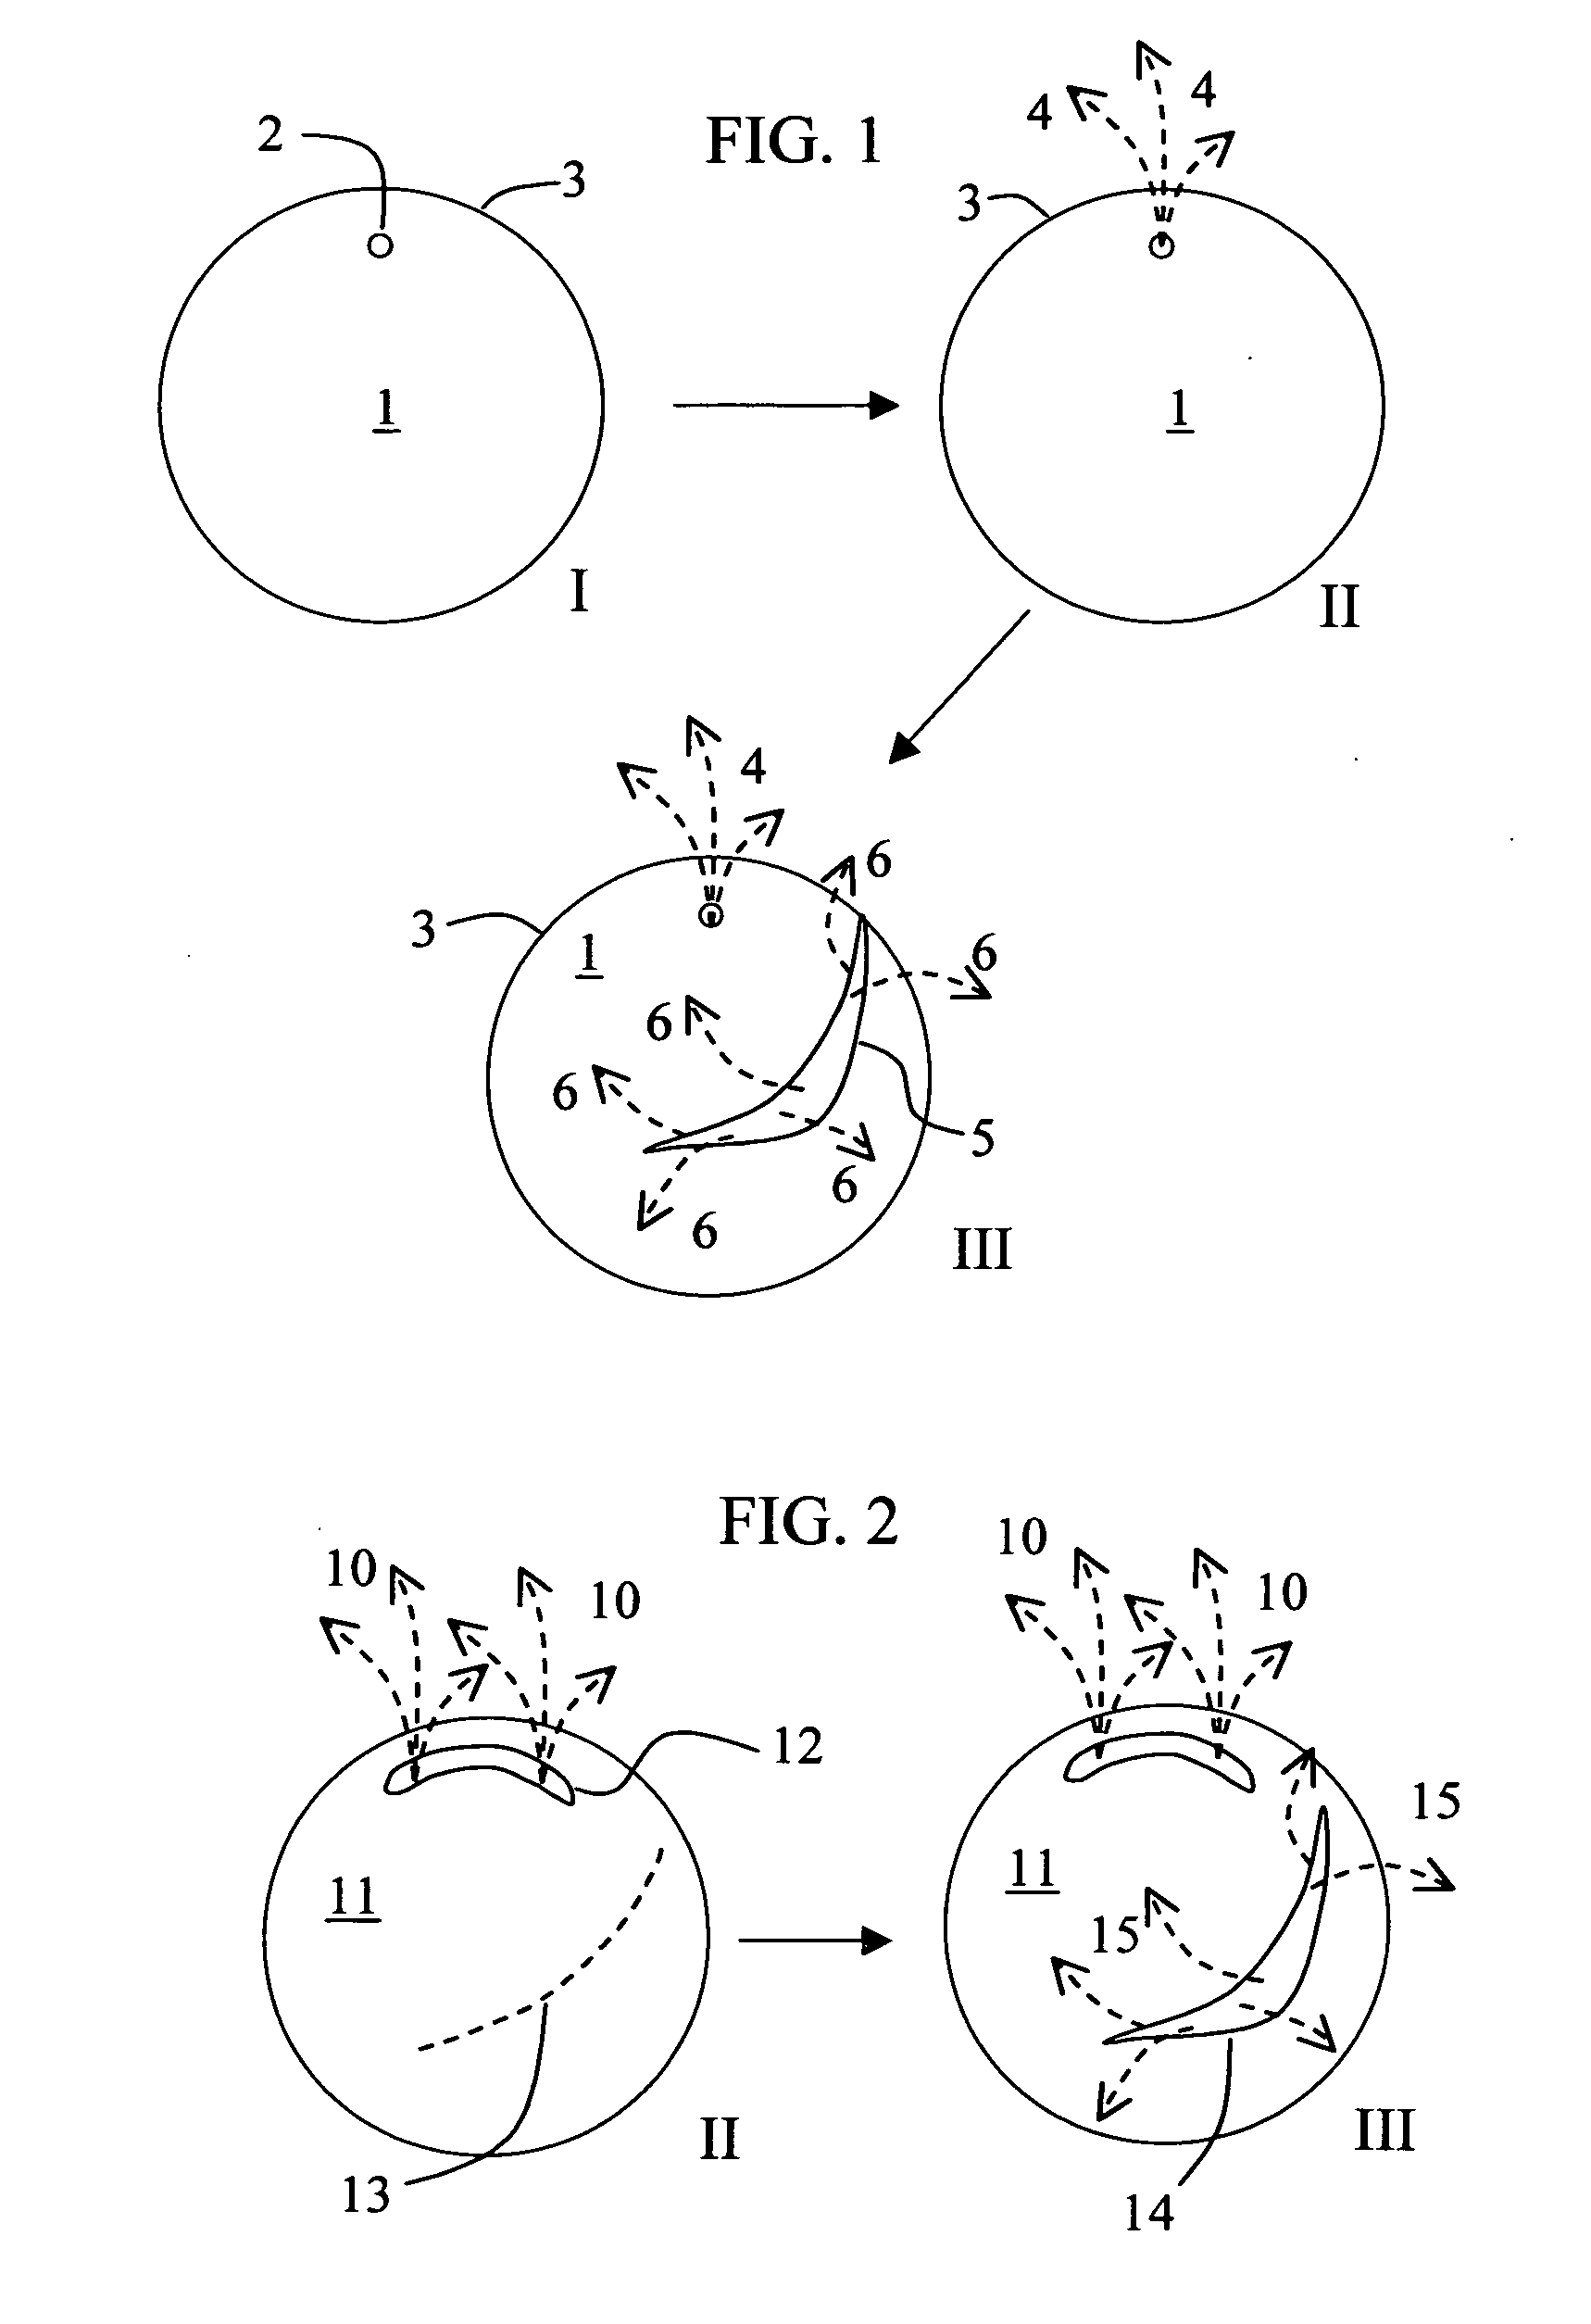 Rupturing controlled release device having a preformed passageway